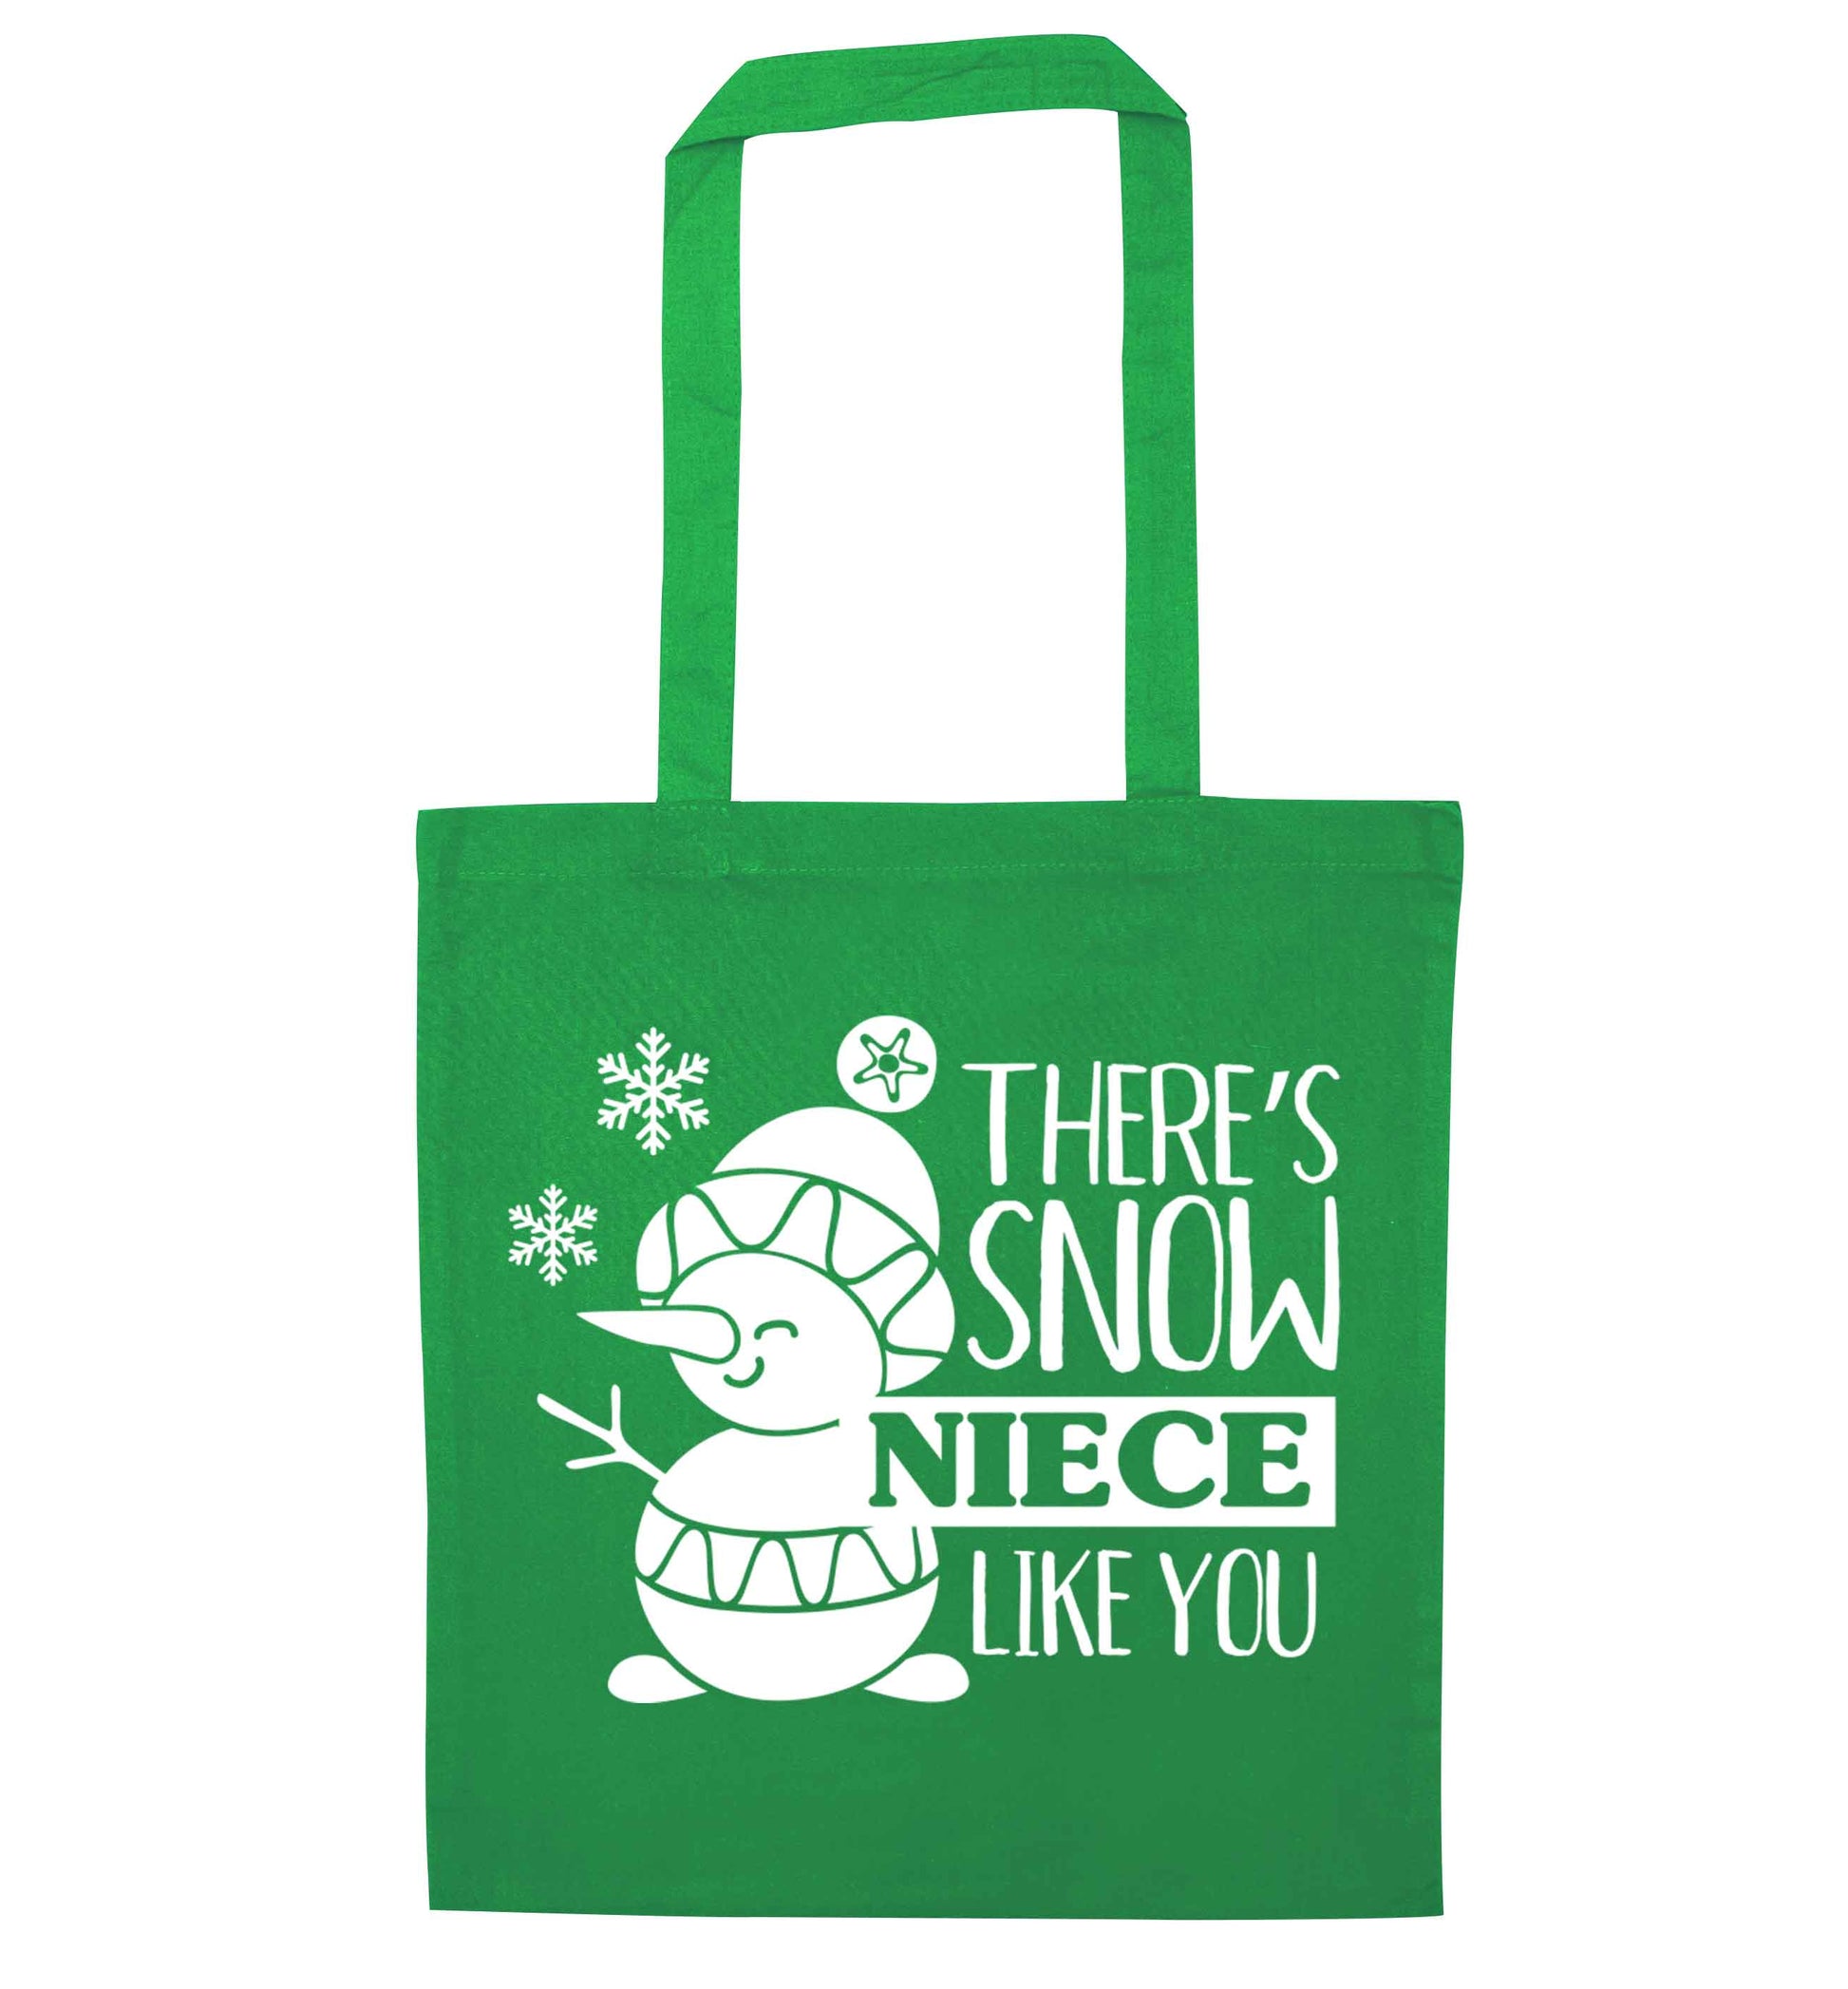 There's snow niece like you green tote bag